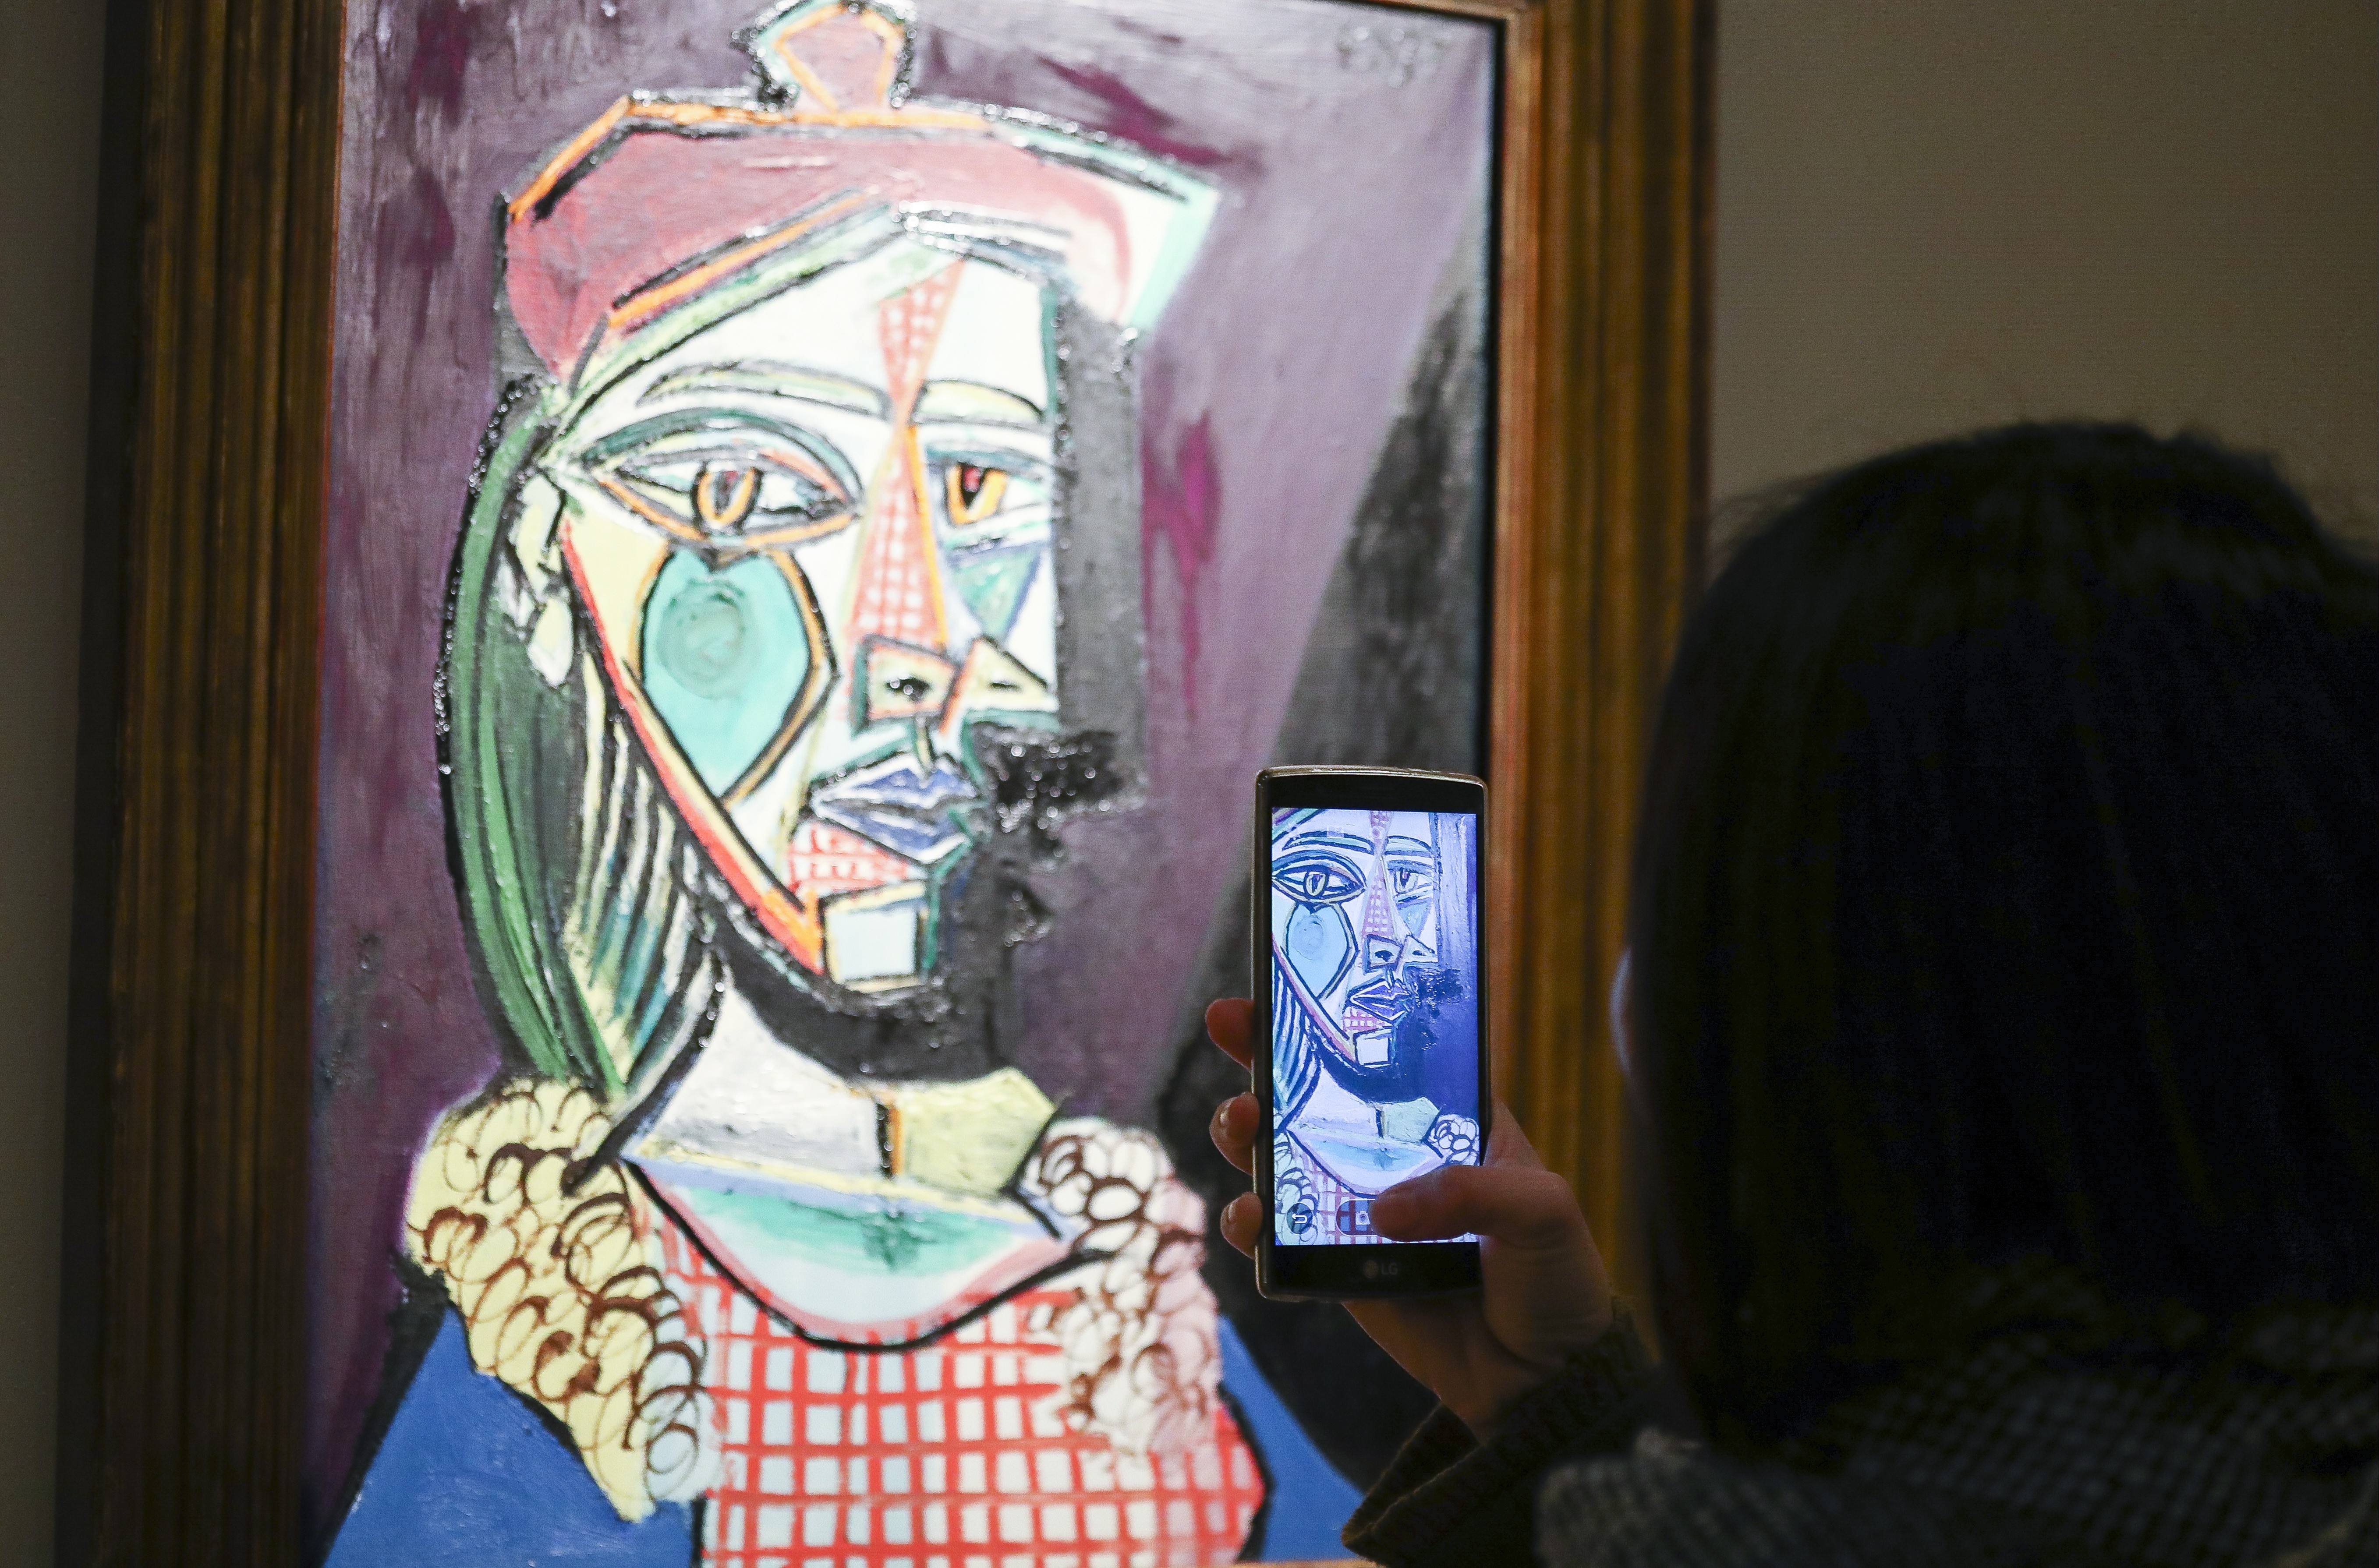 Pablo Picasso’s ‘Femme au béret et à la robe quadrillée (Marie-Thérèse Walter)’ at Sotheby's in Hong Kong. People looking to buy art want to go online for the transparency, says Brian Shipman, chief information officer at Heritage Auctions. Photo: Nora Tam